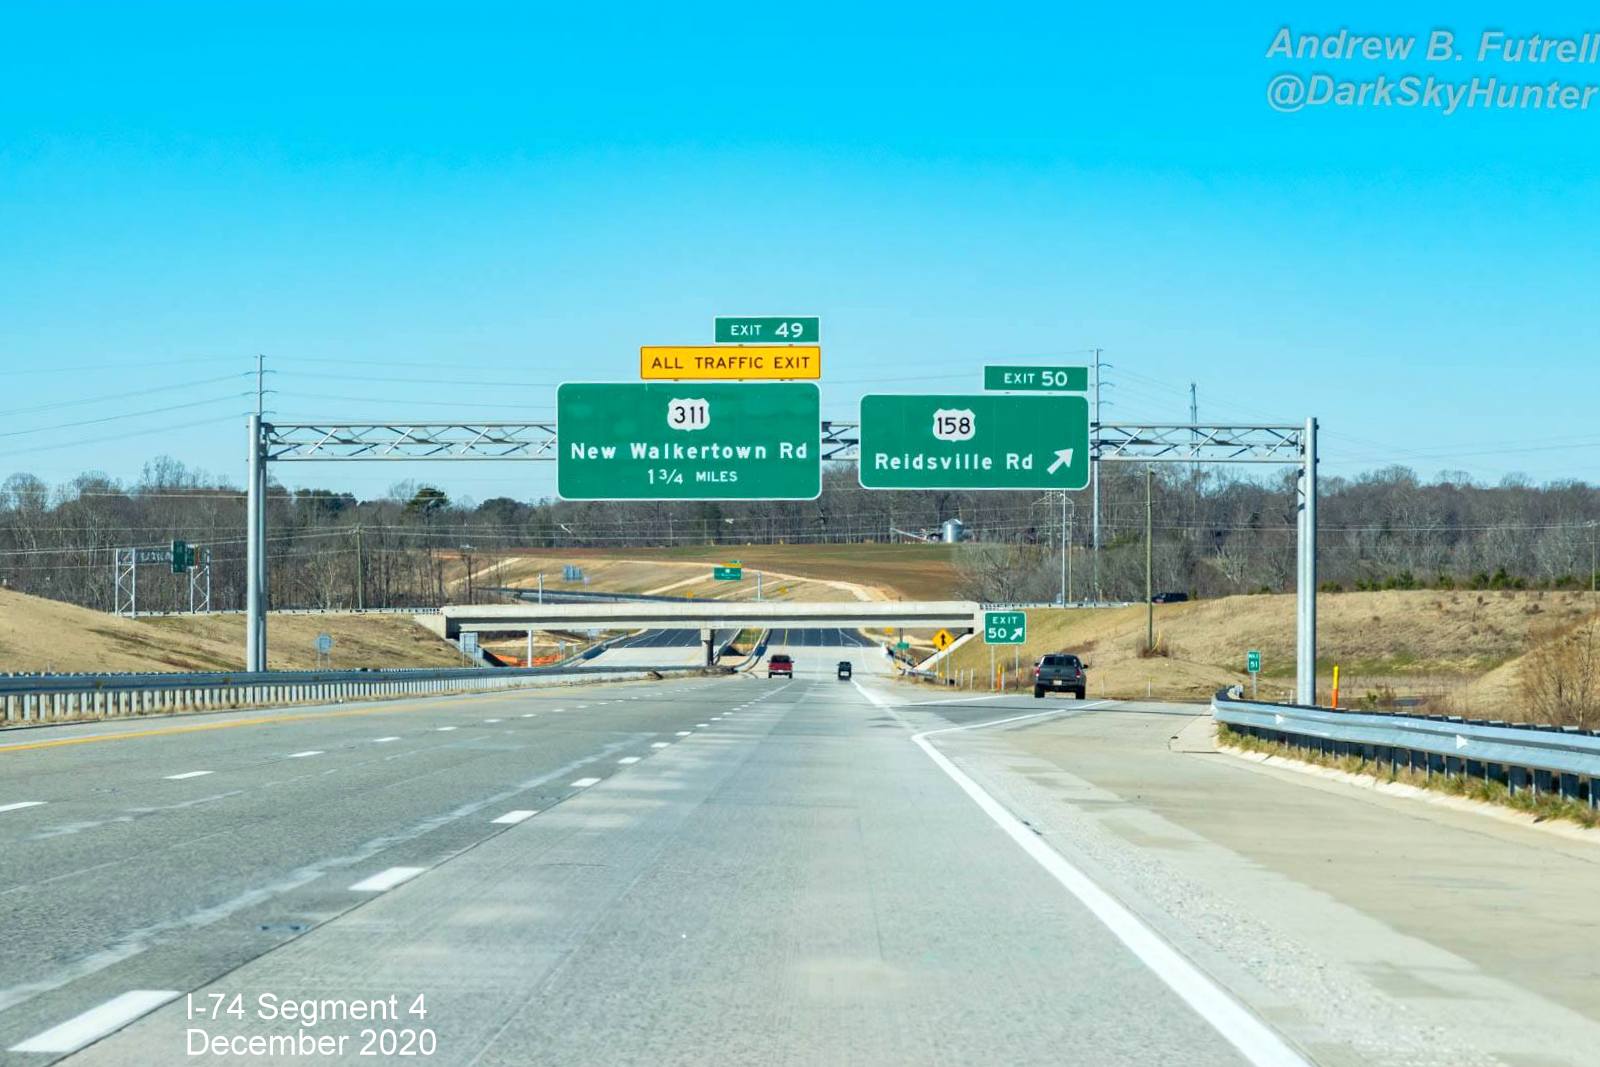 Image of overhead signs for newly opened section of NC 74 (Future I-74) West Winston-Salem Northern 
        Beltway, by Andrew F. Futrell, December 2020